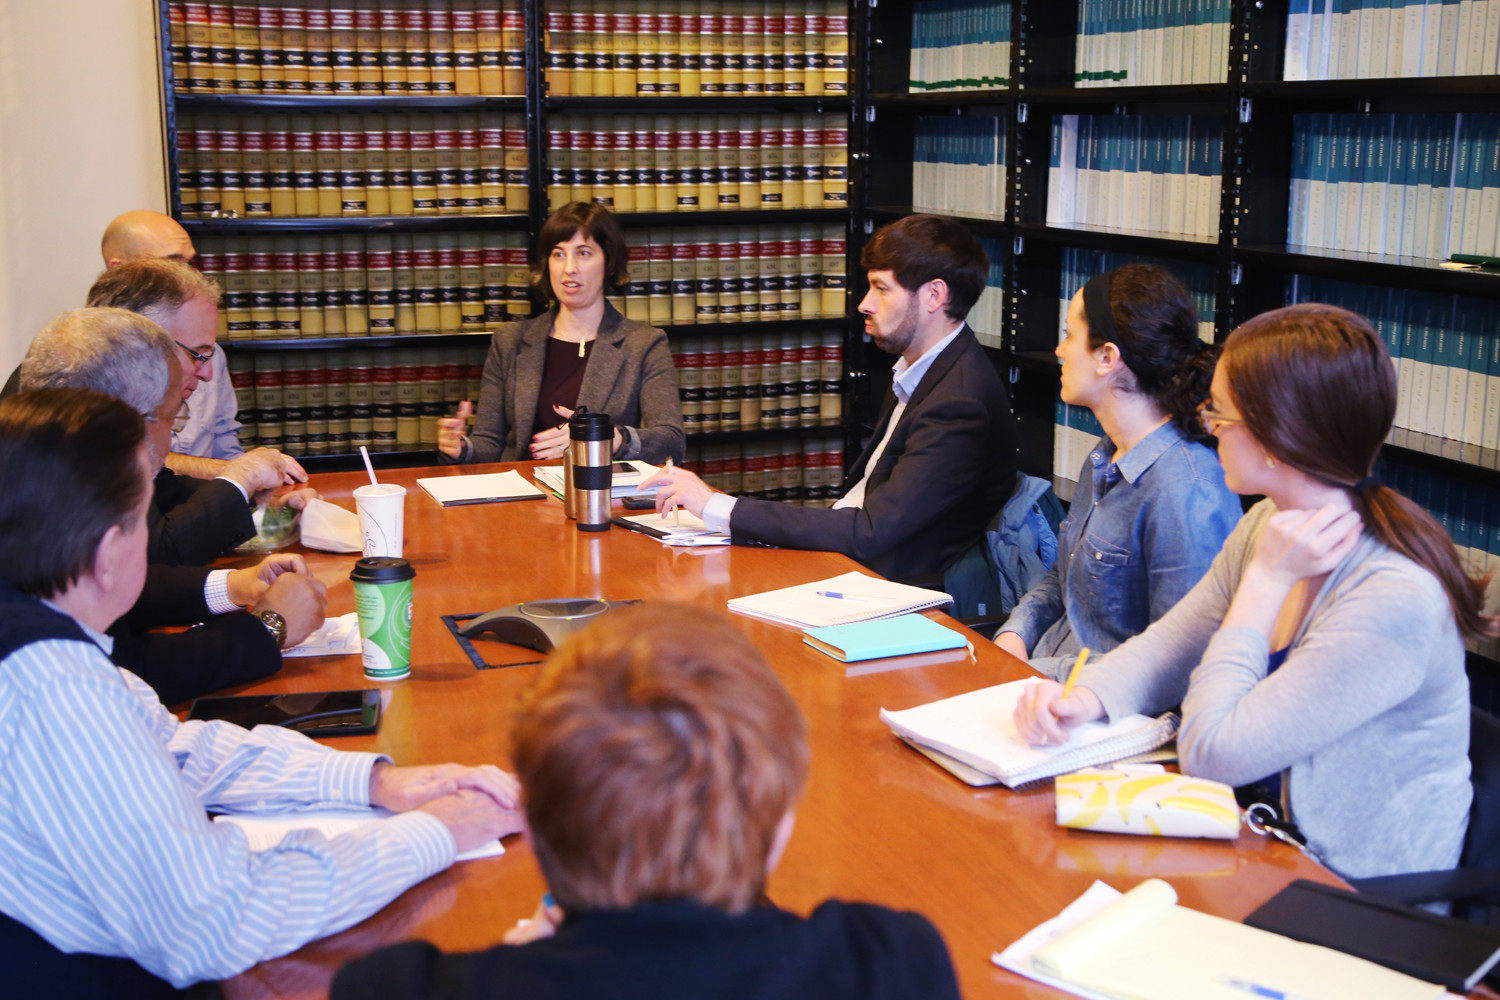 Angela Ciolfi, a legal director at Legal Aid Justice Center’s Charlottesville office, talks strategy with the Drive Down the Debt team, which includes alumni and current students. (Photo courtesy UVA School of Law)